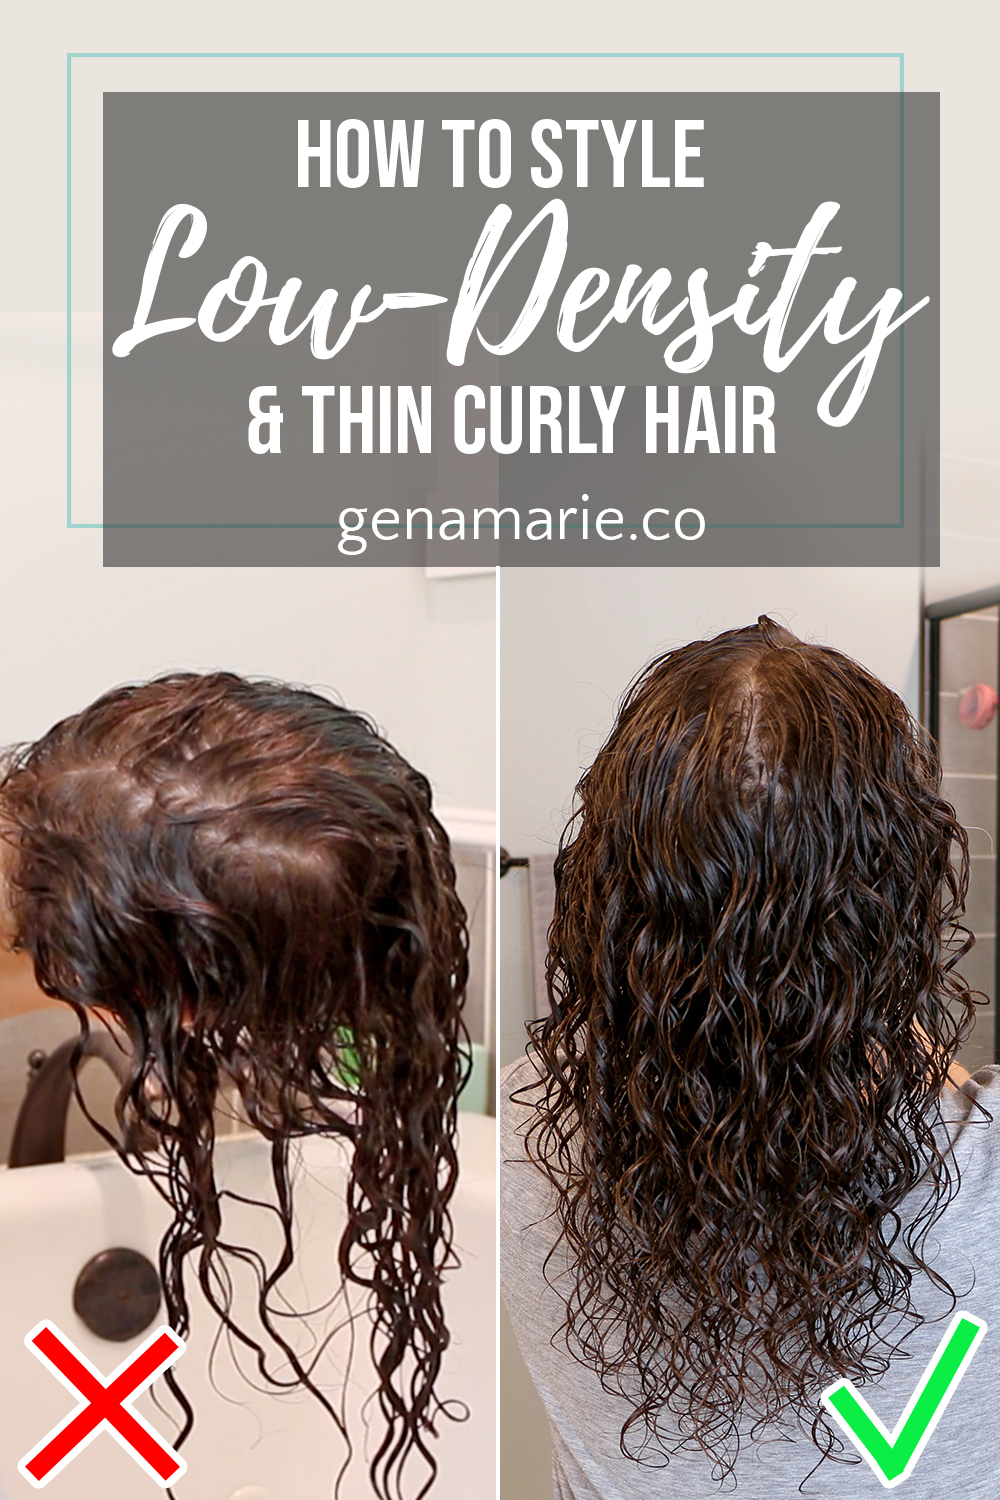 How to Style Low-Density/Thin Curls, Dos & Don'ts - Gena Marie